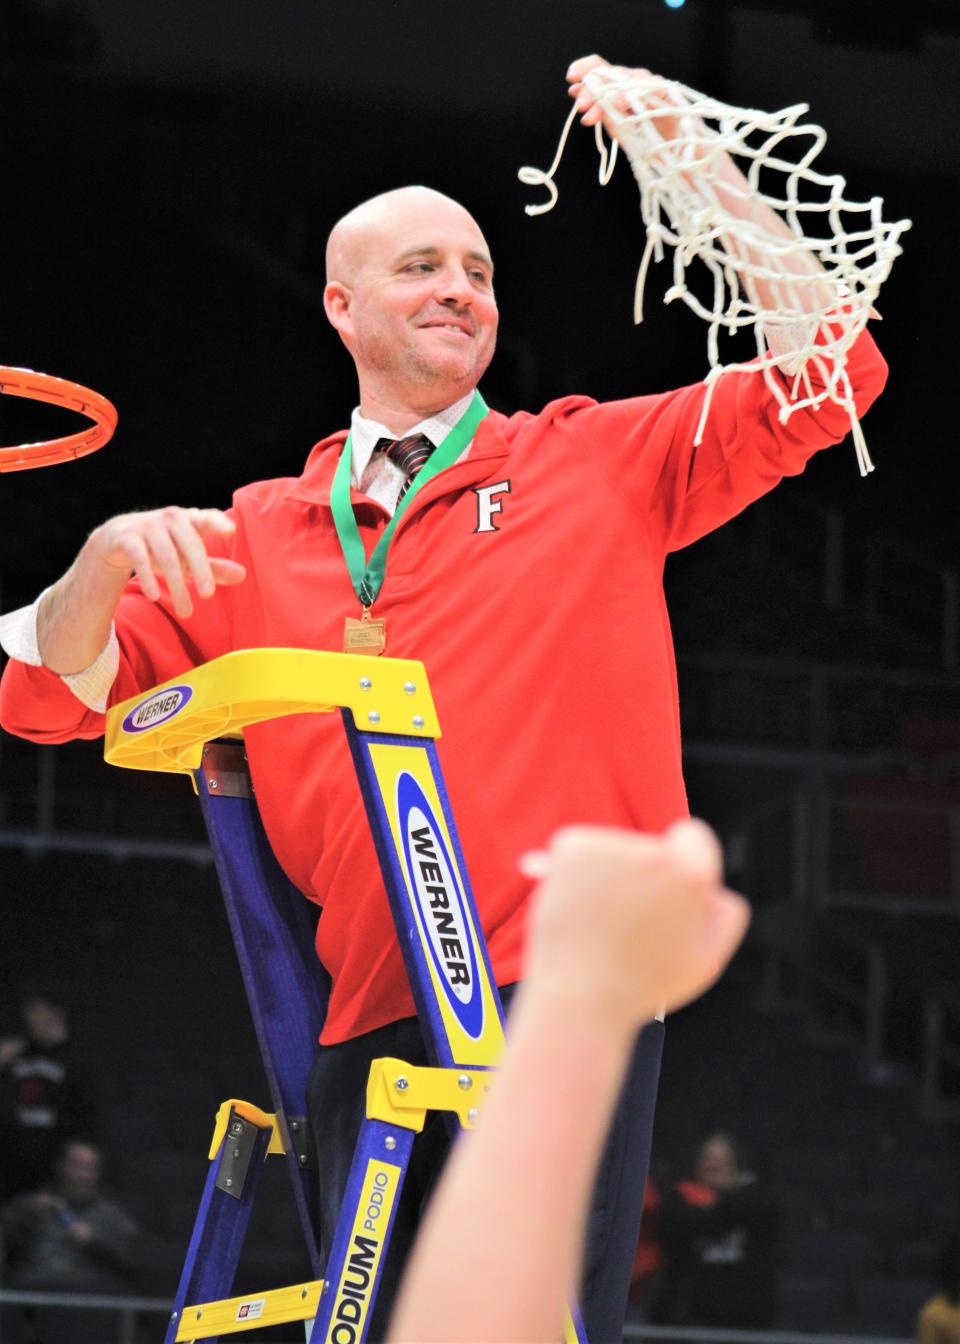 Fairfield head coach D.J. Wyrick with the net during Fairfield's 76-51 win over Huber Heights Wayne in an OHSAA Division I boys basketball district championship game March 4, 2023, at University of Dayton Arena.